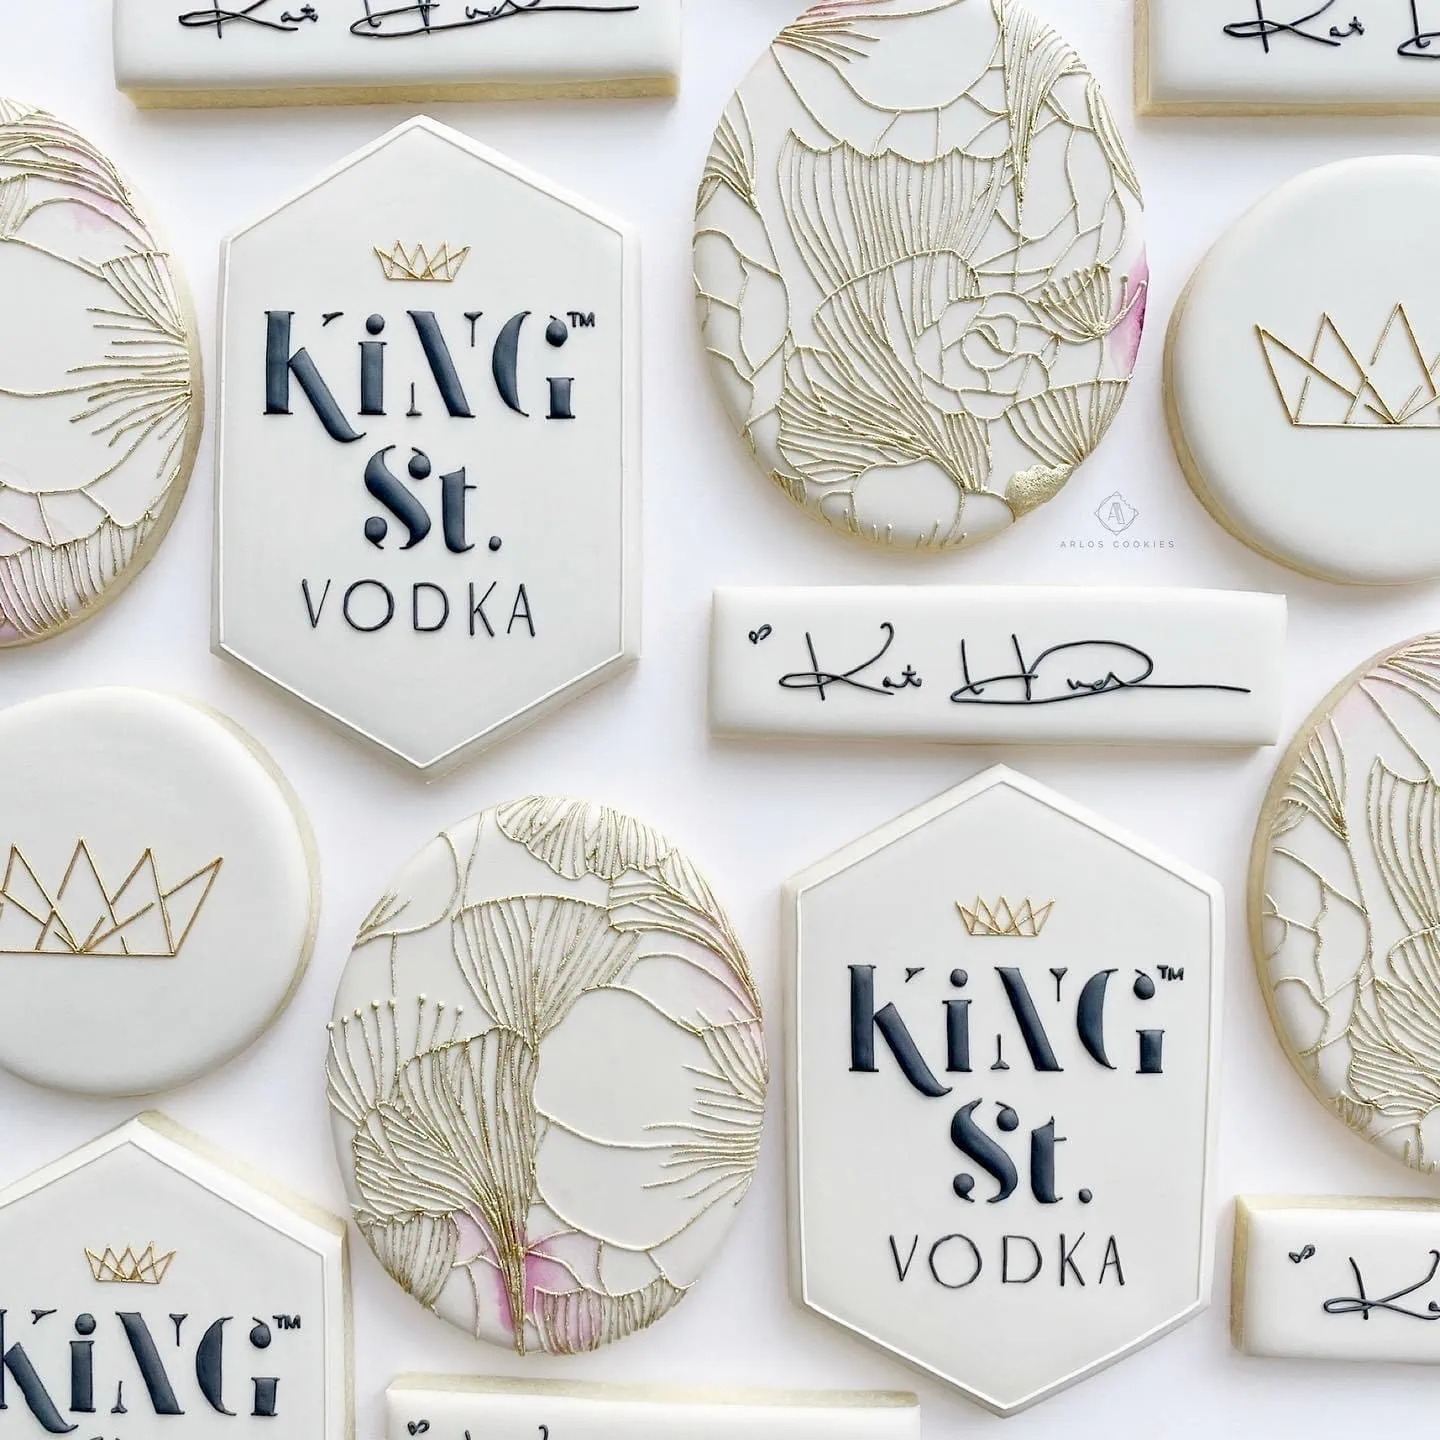 Cookies decorated with floral line drawings and the King St. Vodka logo